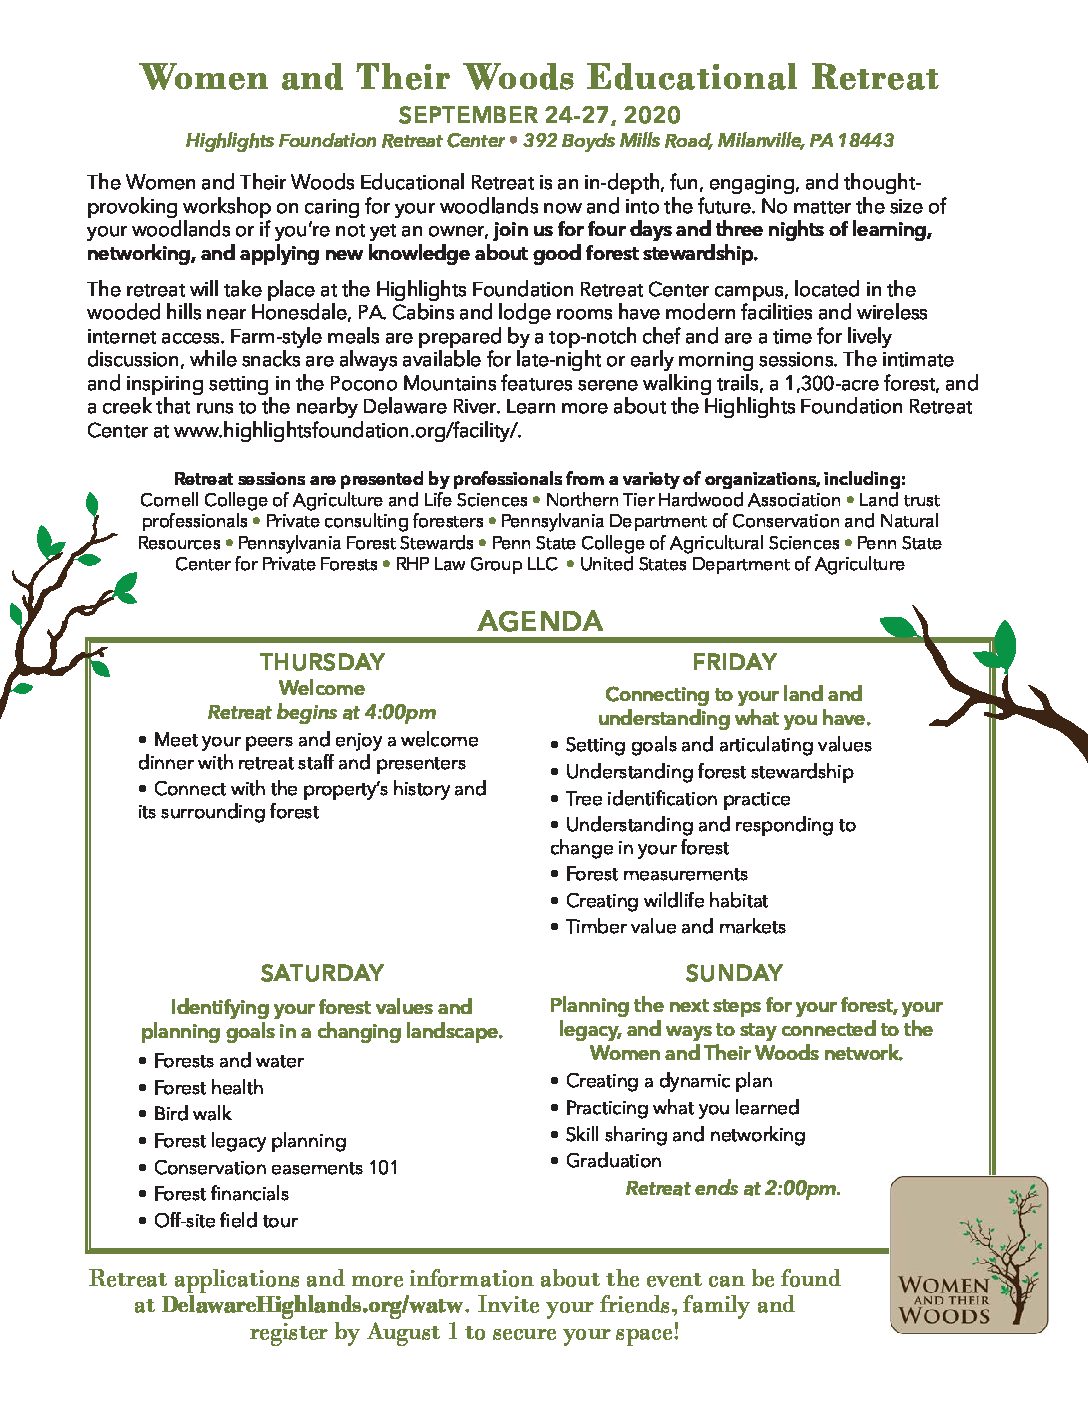 2020 Women and Their Woods Educational Retreat AGENDA | Delaware Highlands  Conservancy